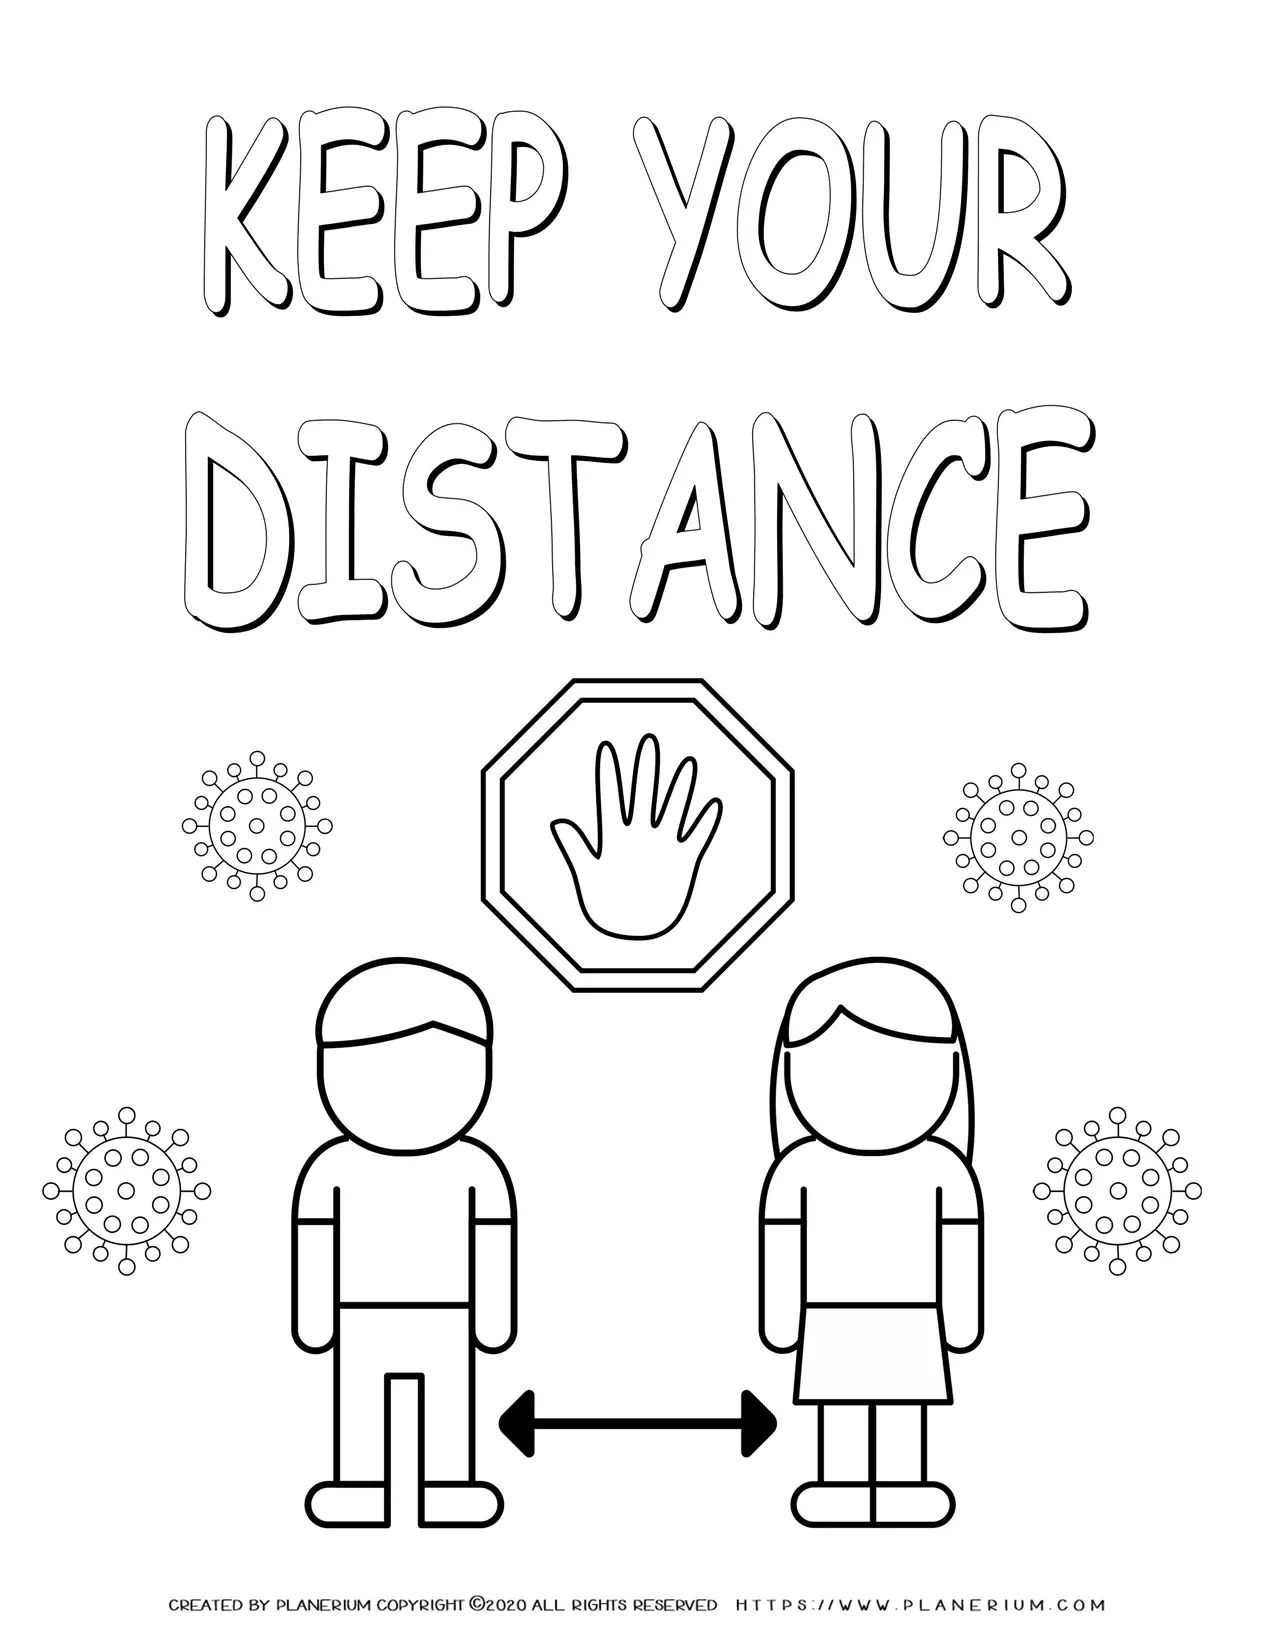 Keep Your Distance - Free Coloring Page | Planerium